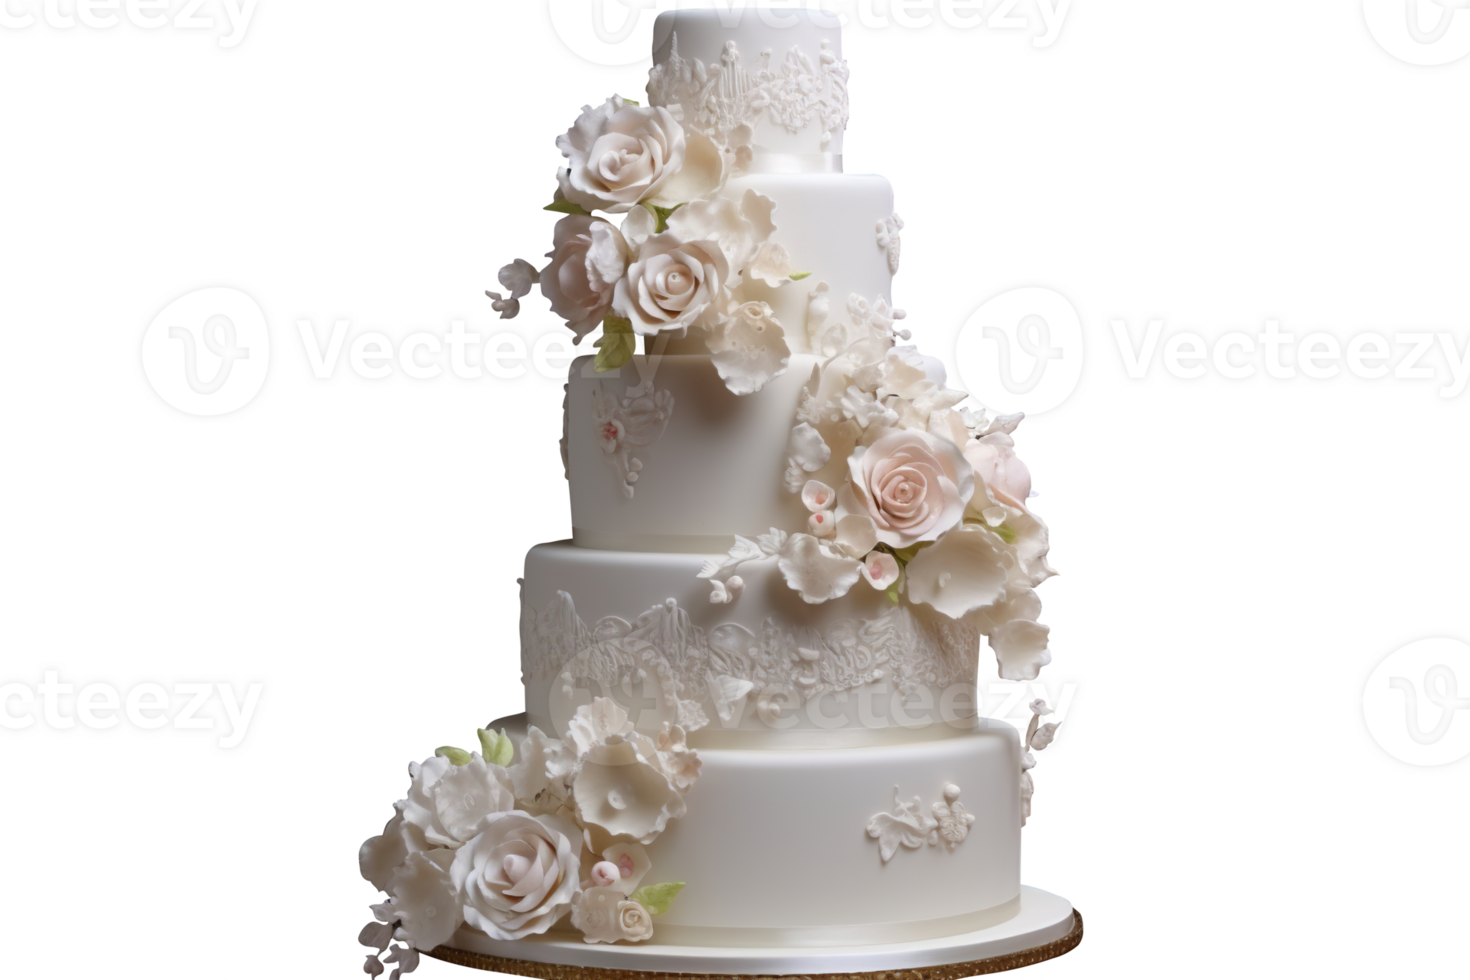 Delicious decorated wedding fondant cake on transparent background png